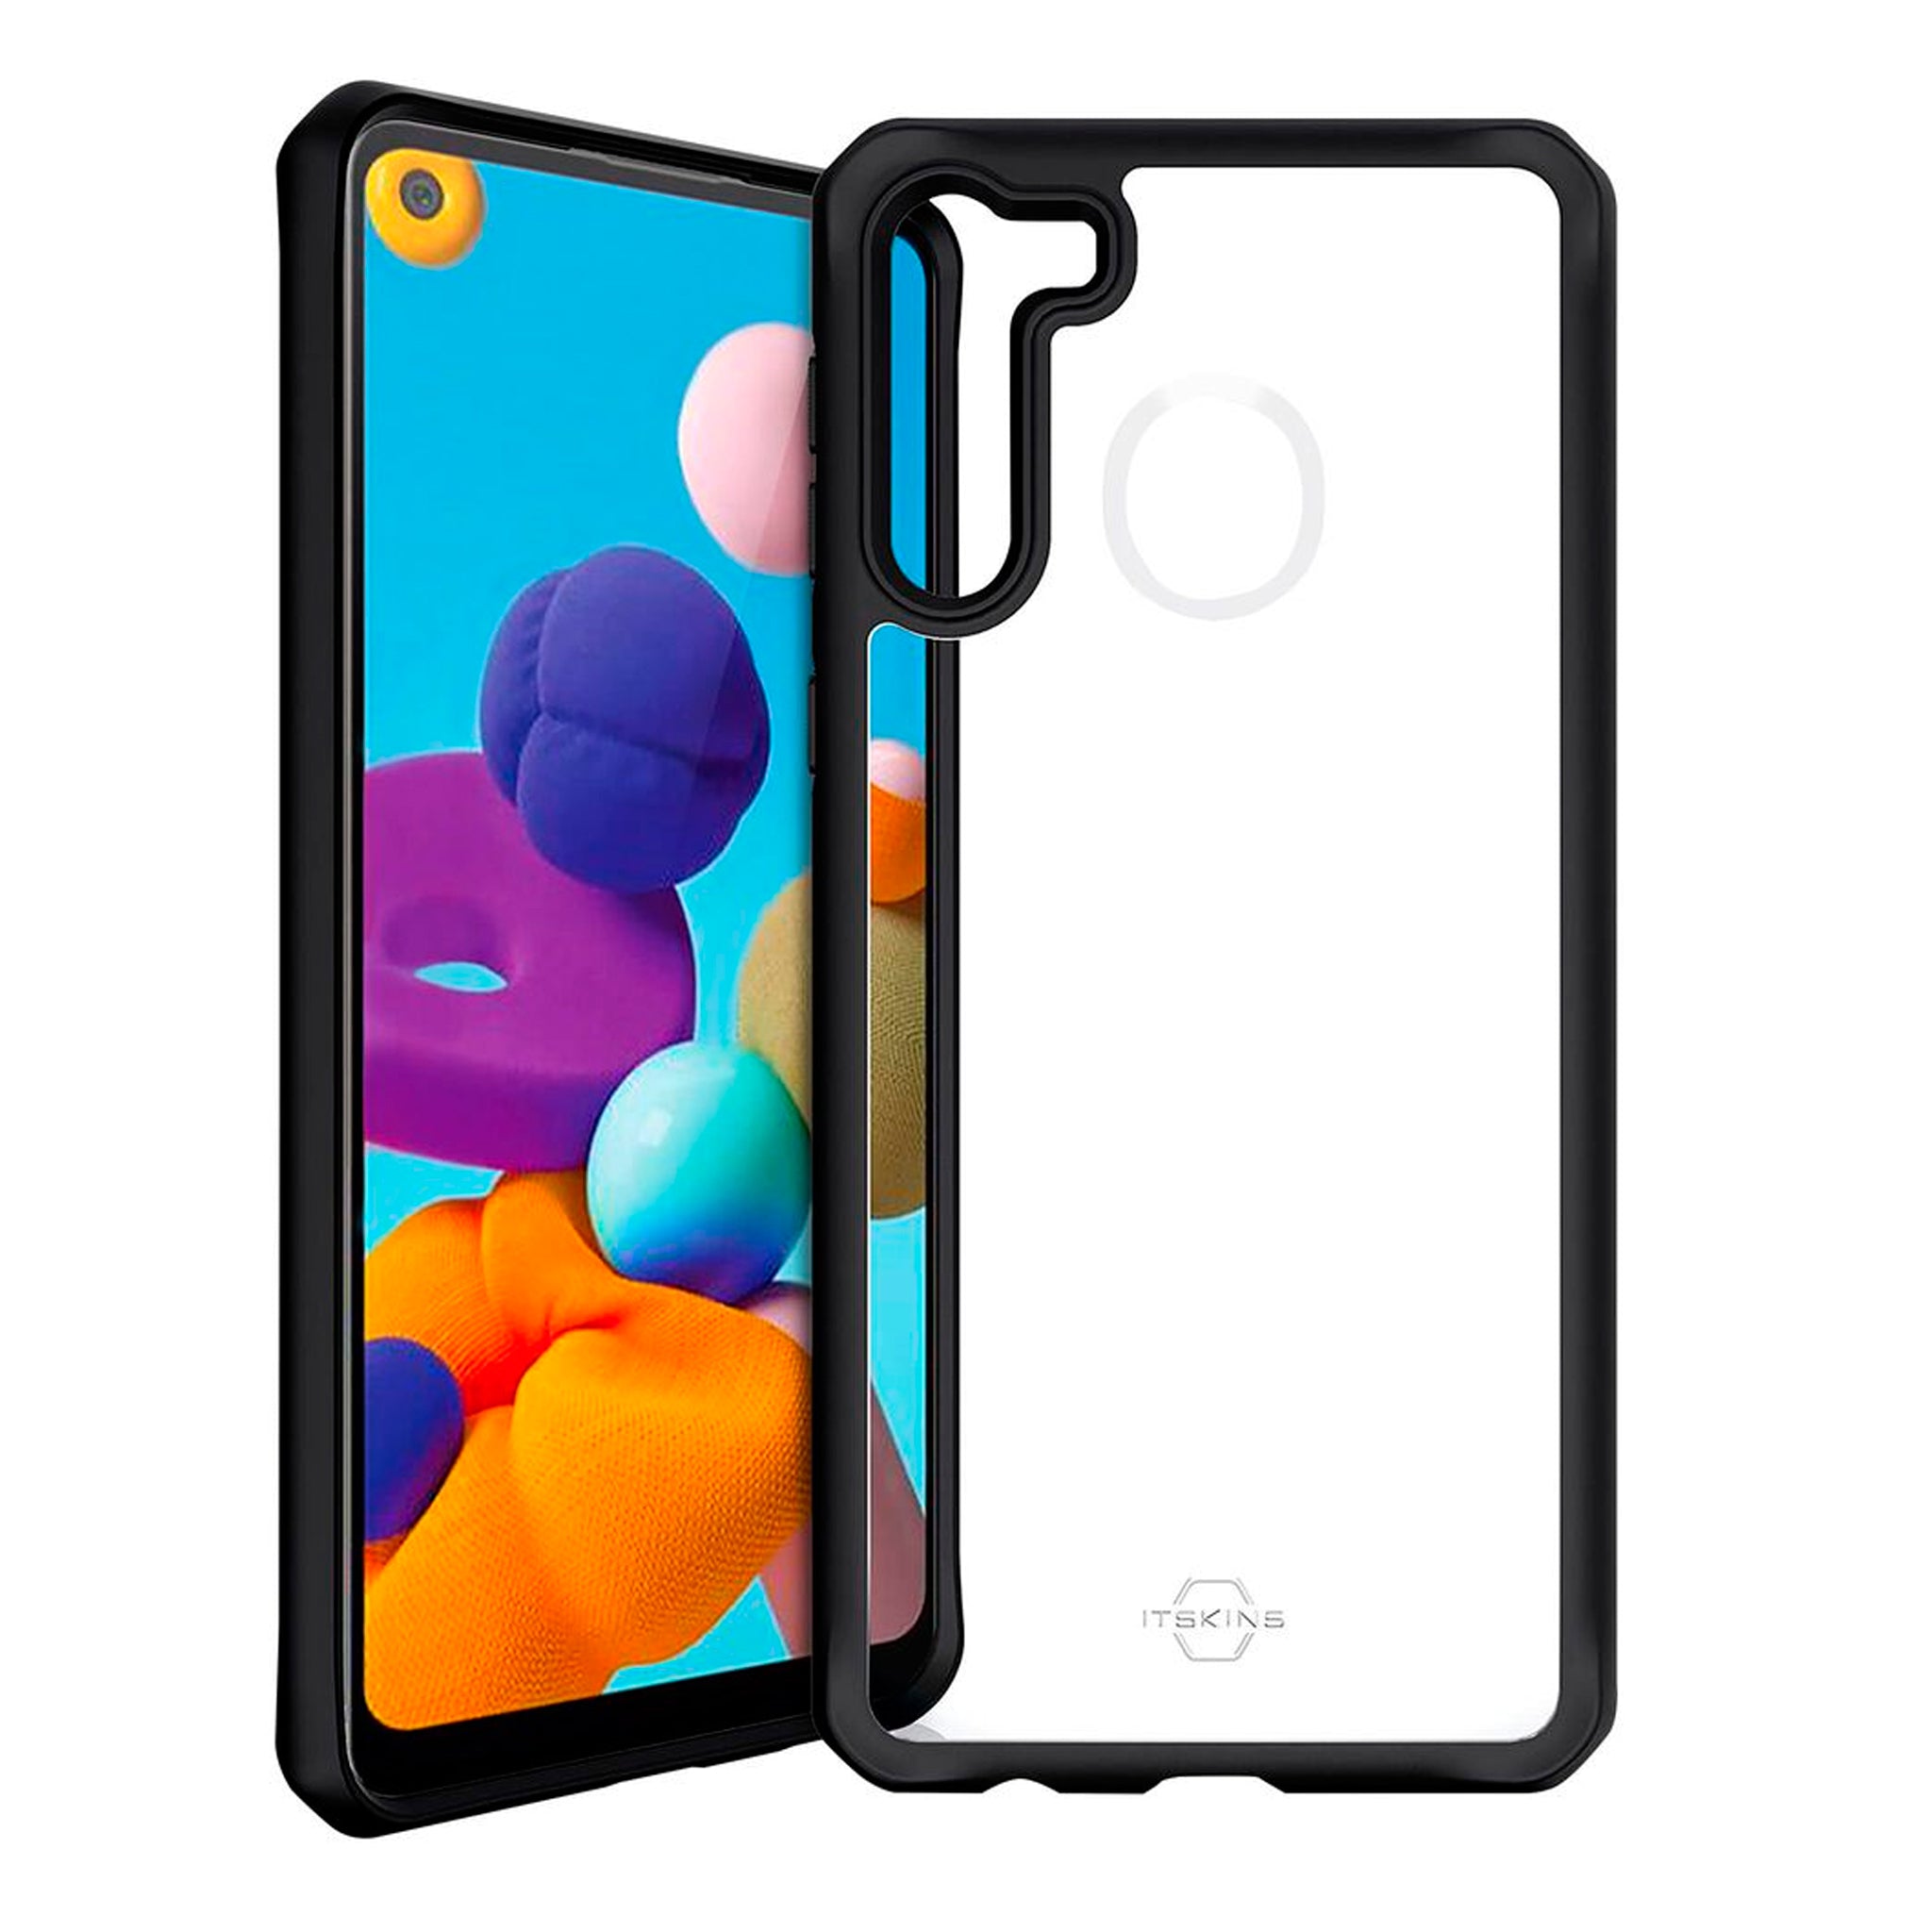 Itskins - Hybrid Solid Case For Samsung Galaxy A21 - Black And Transparent